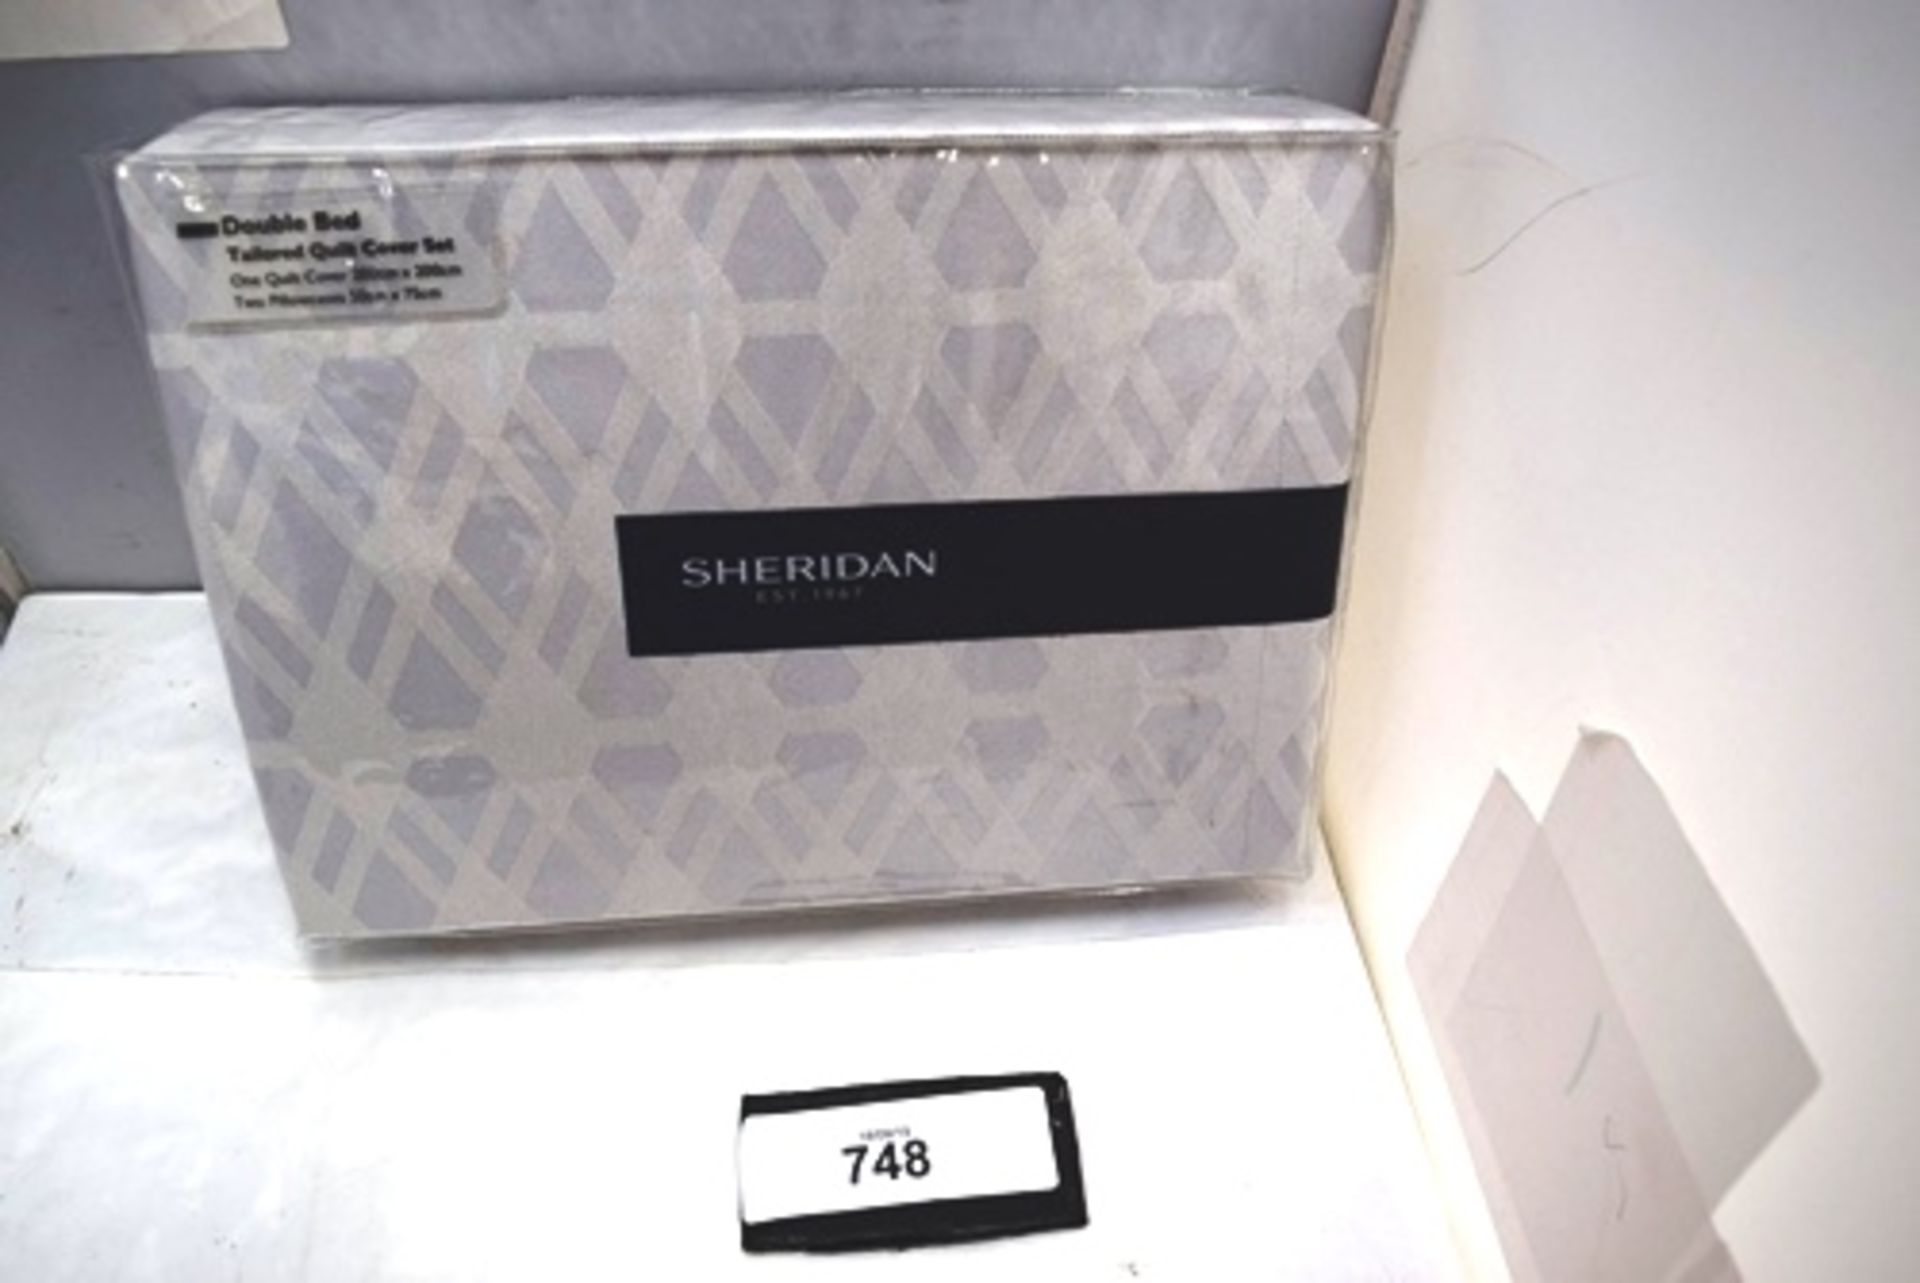 1 x Sheridan Brookley silver double bed tailored quilt cover set, RRP £179.00 - New in pack (GS20)